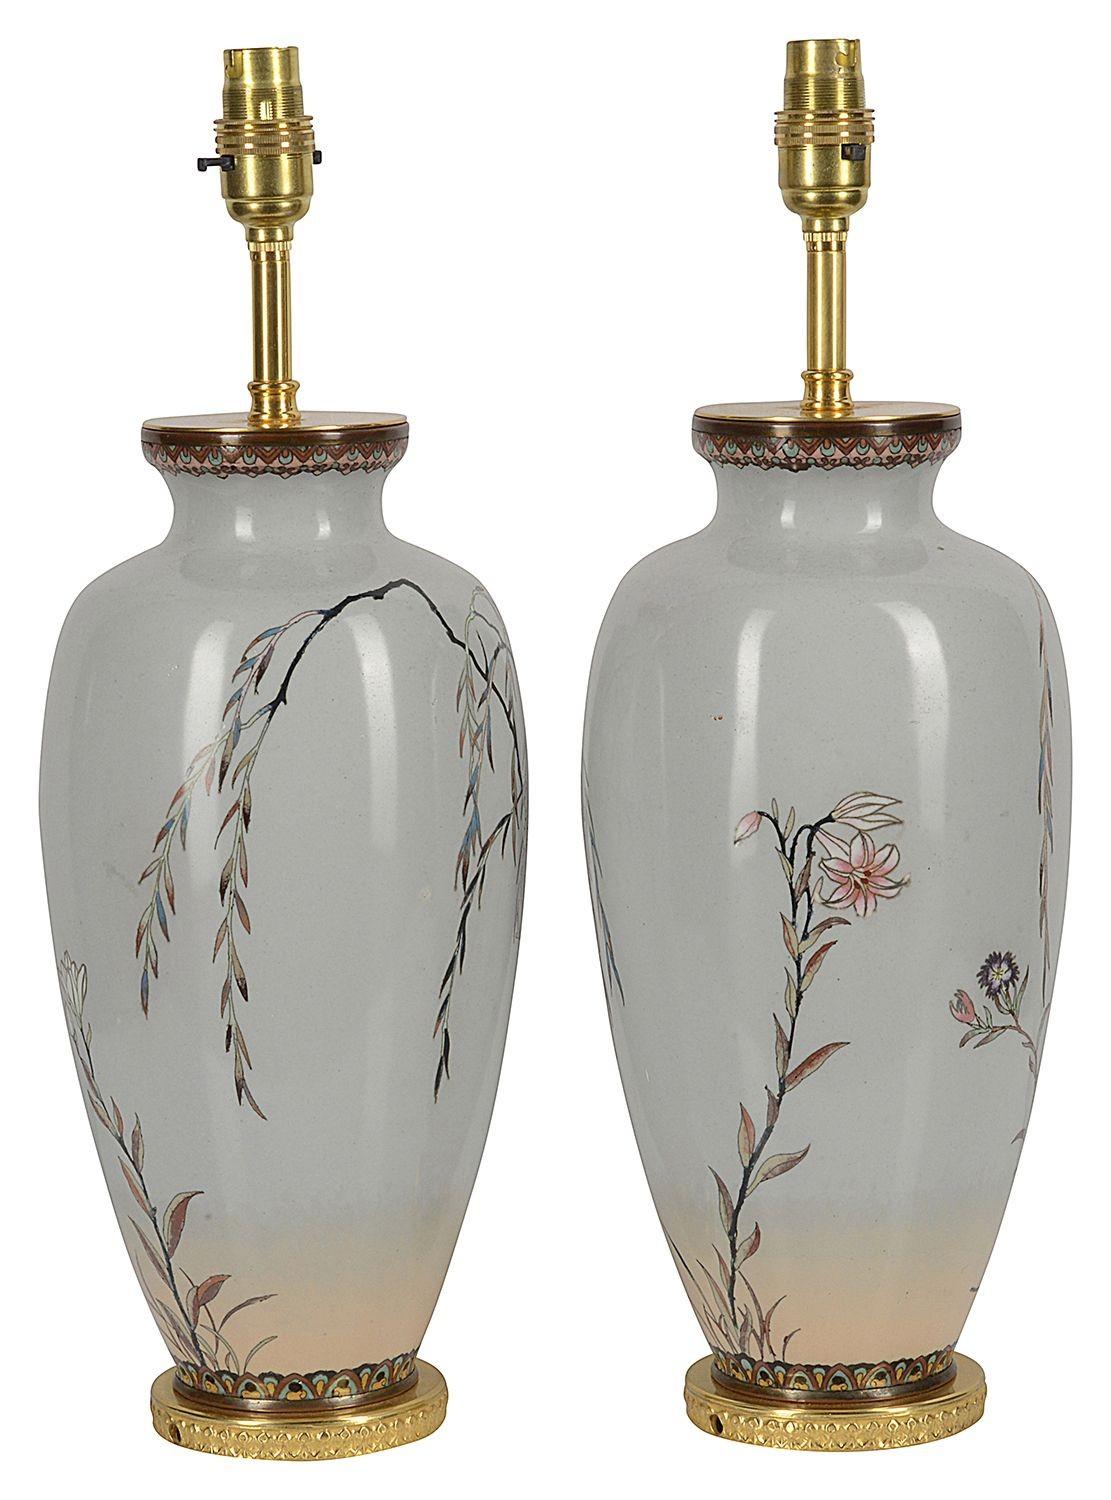 Pair Japanese Meiji Period Cloisonne Enamel Vases / Lamps In Good Condition For Sale In Brighton, Sussex